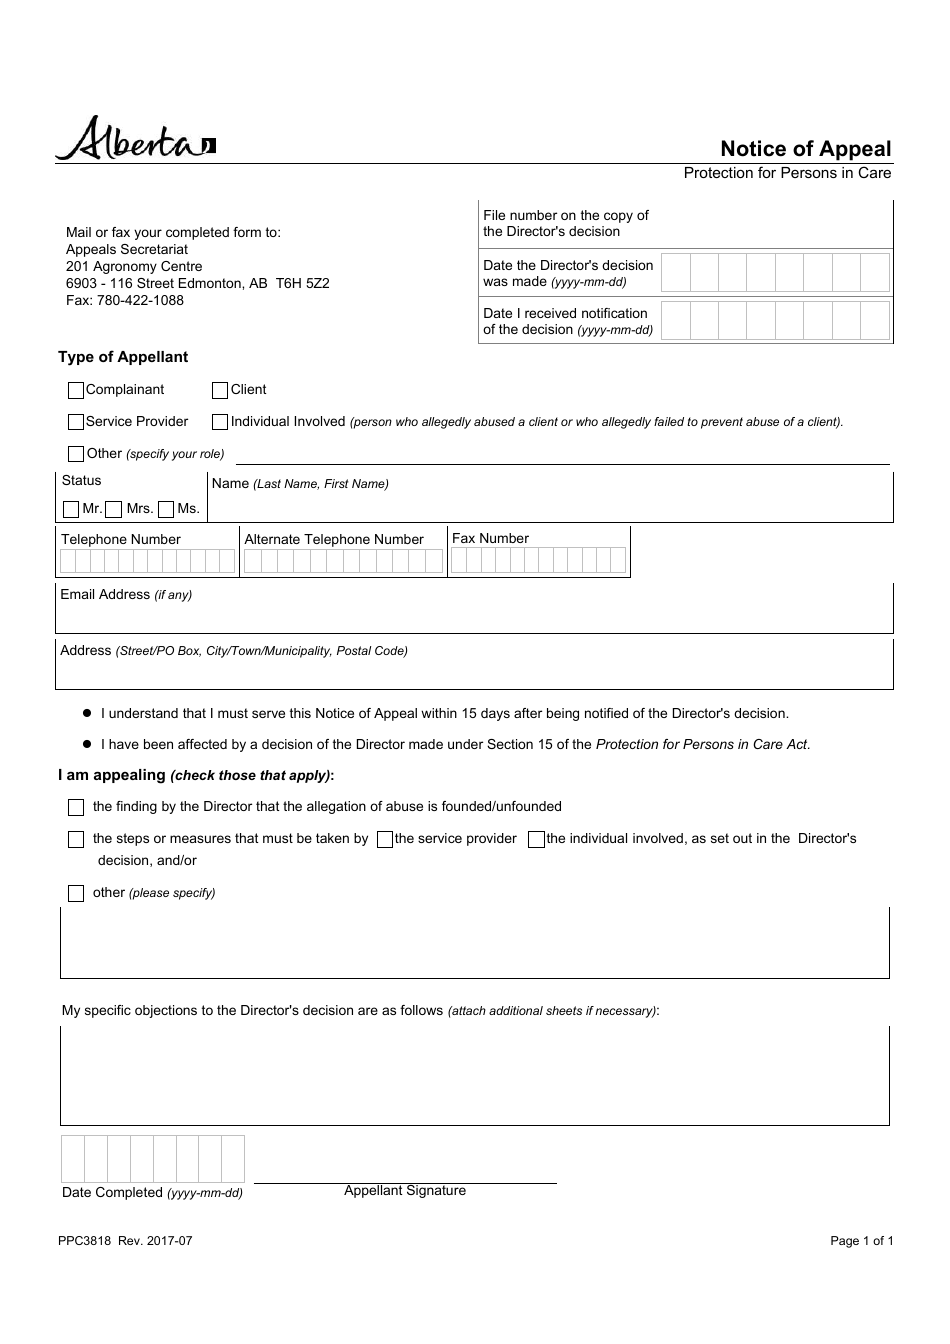 Form PPC3818 Notice of Appeal - Alberta, Canada, Page 1